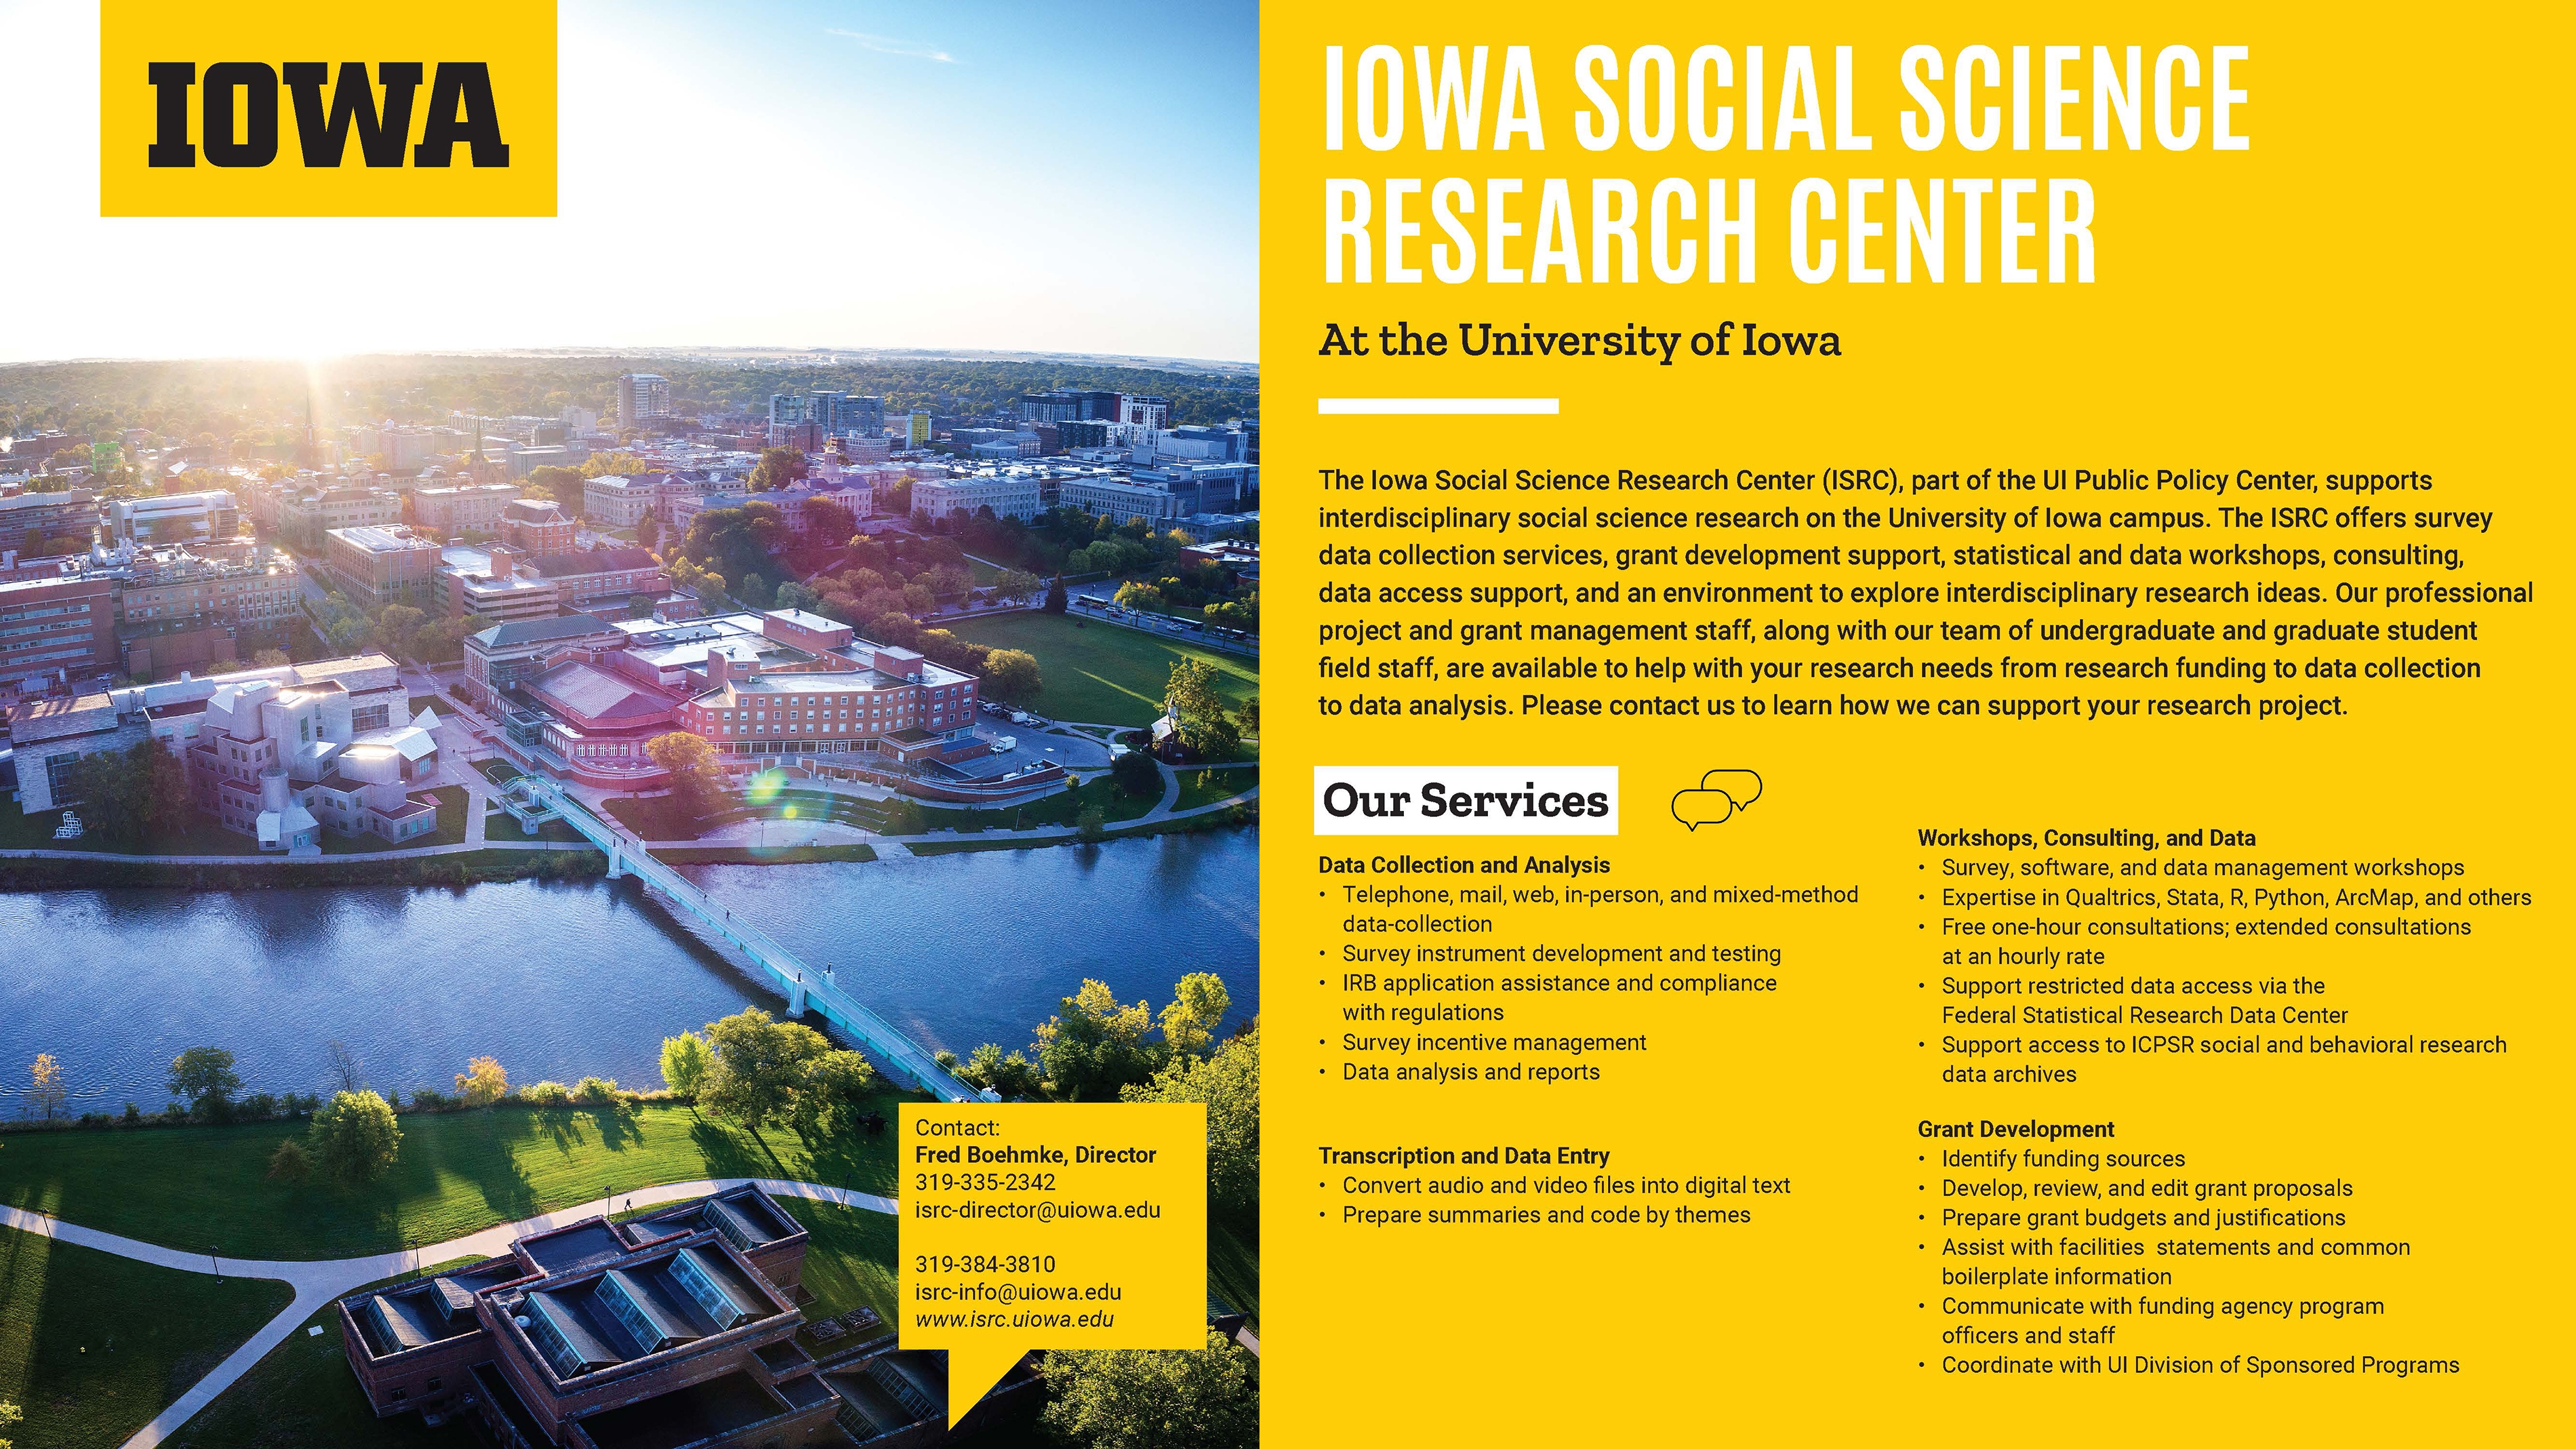 Iowa Social Science Research Center